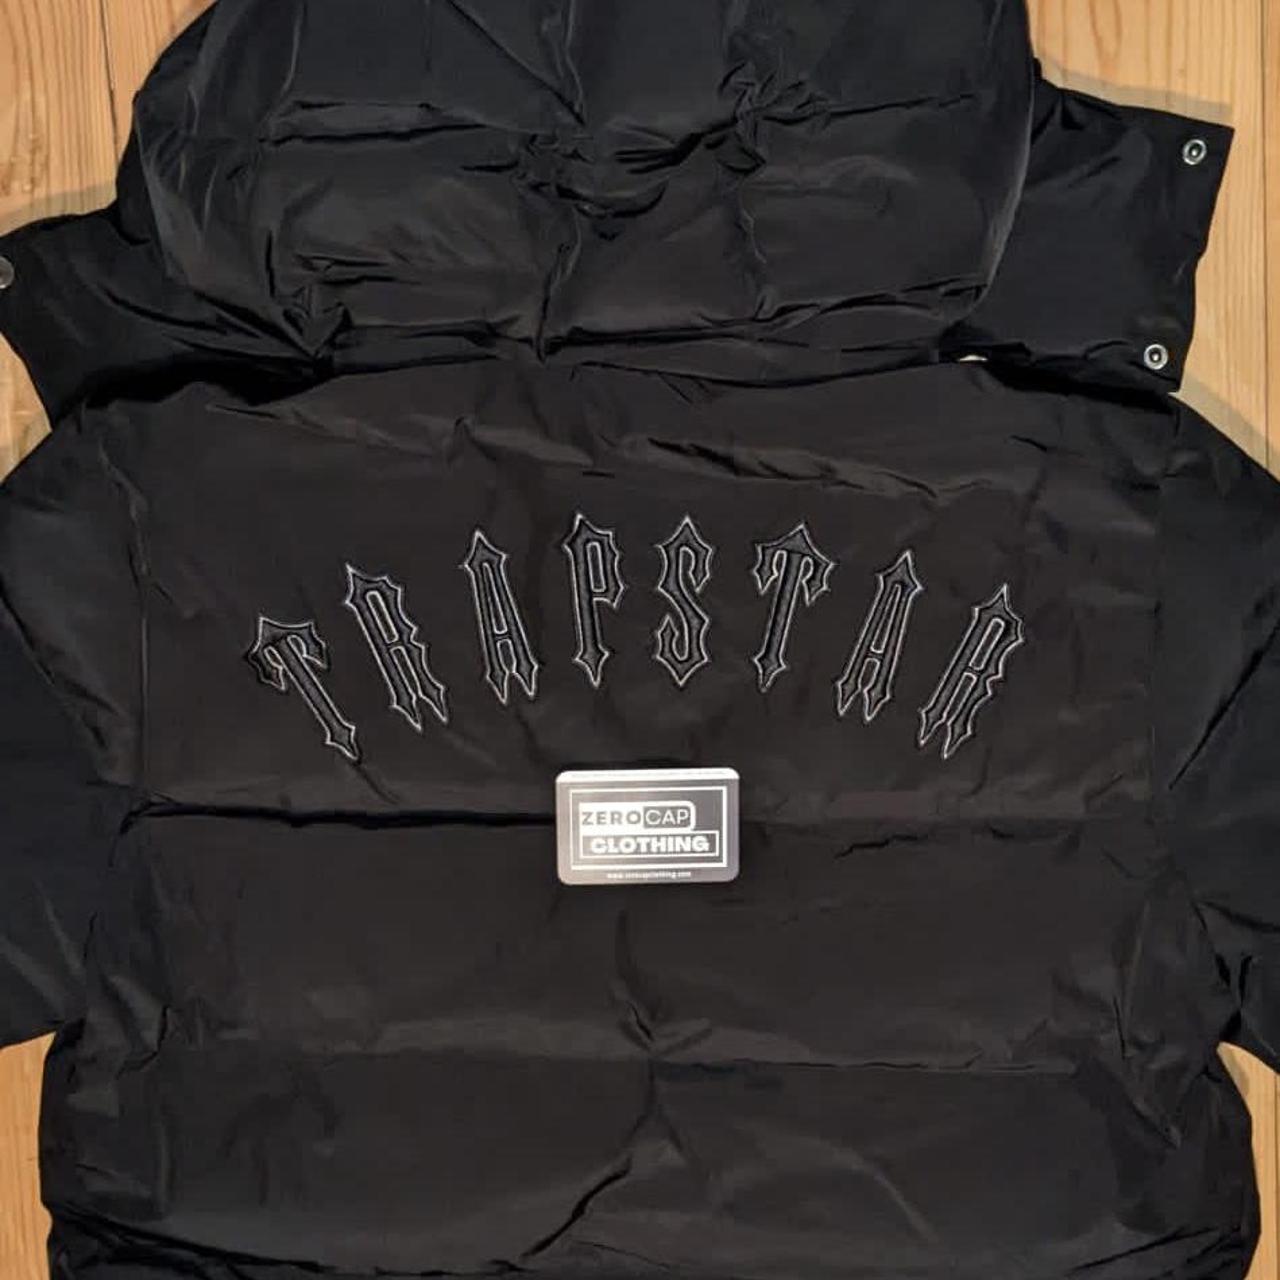 Trapstar Blackout Edition Jacket With Detachable Hoode - Depop